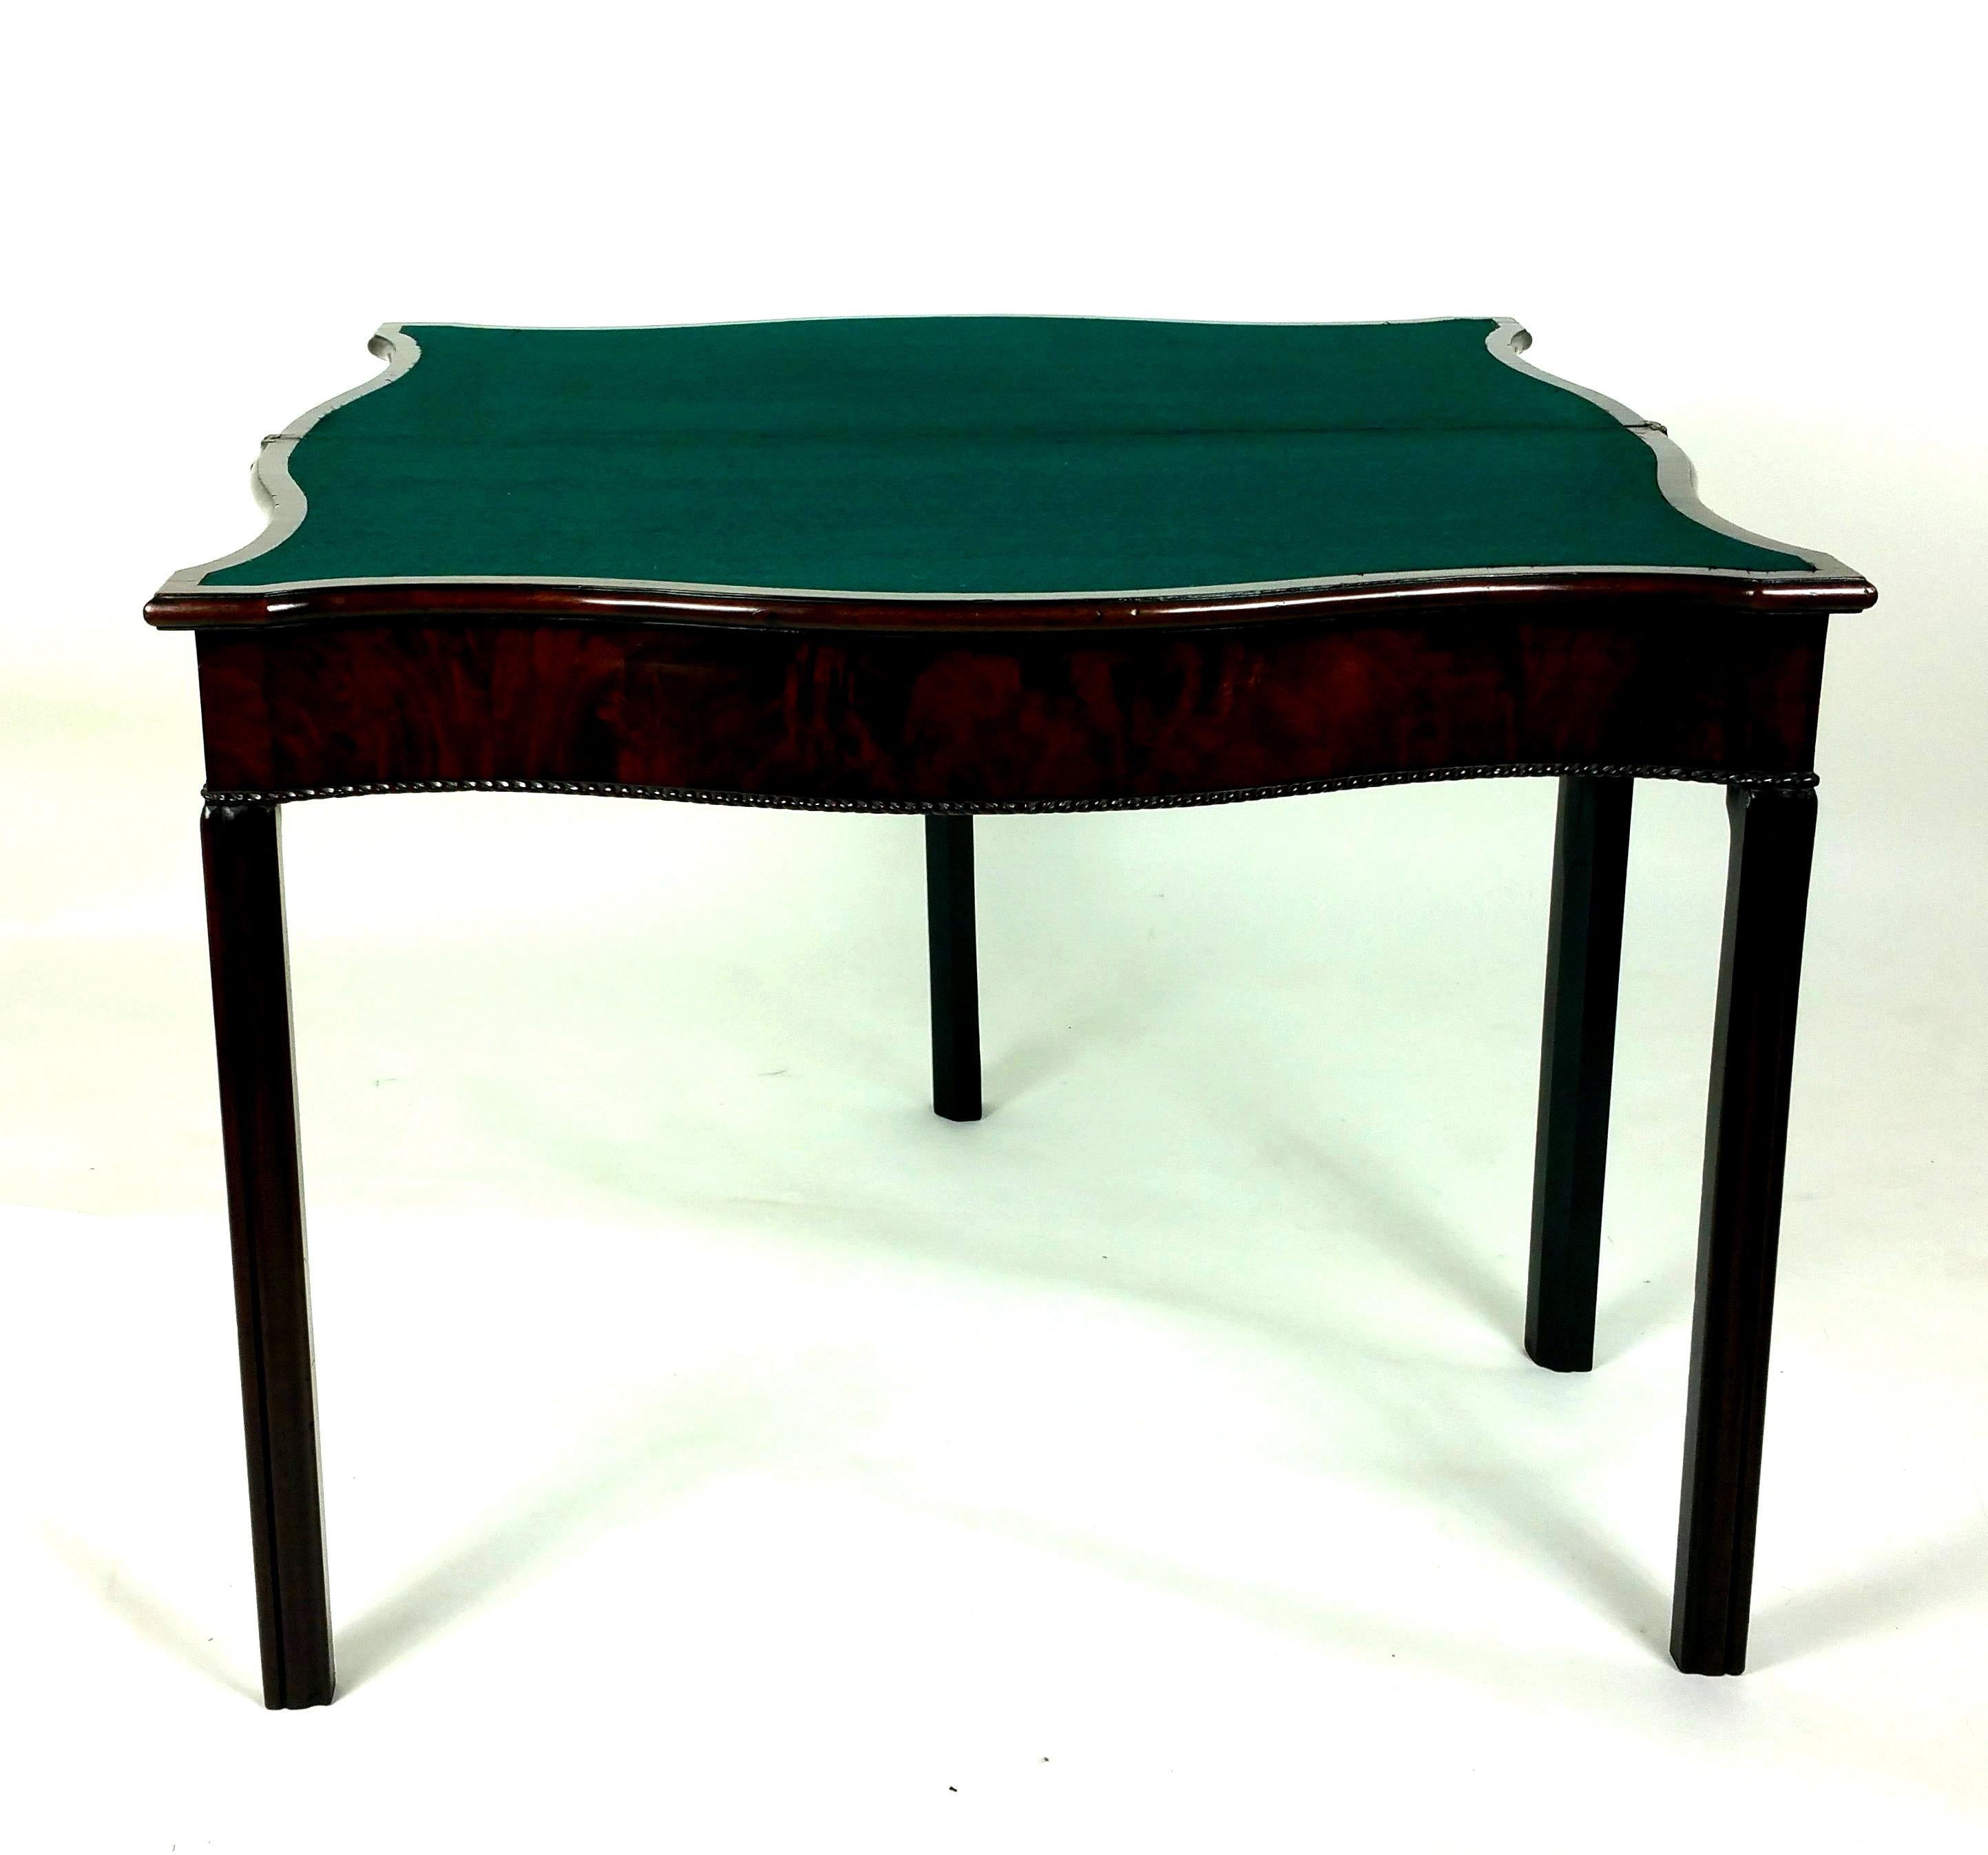 This lovely 18th century figured mahogany serpentine shaped card table that stands on moulded chamfered supports and has a fold over design which, when opened reveals a green baize lined interior. It measures 28 in – 71.1 cm in height and 18 ½ in –